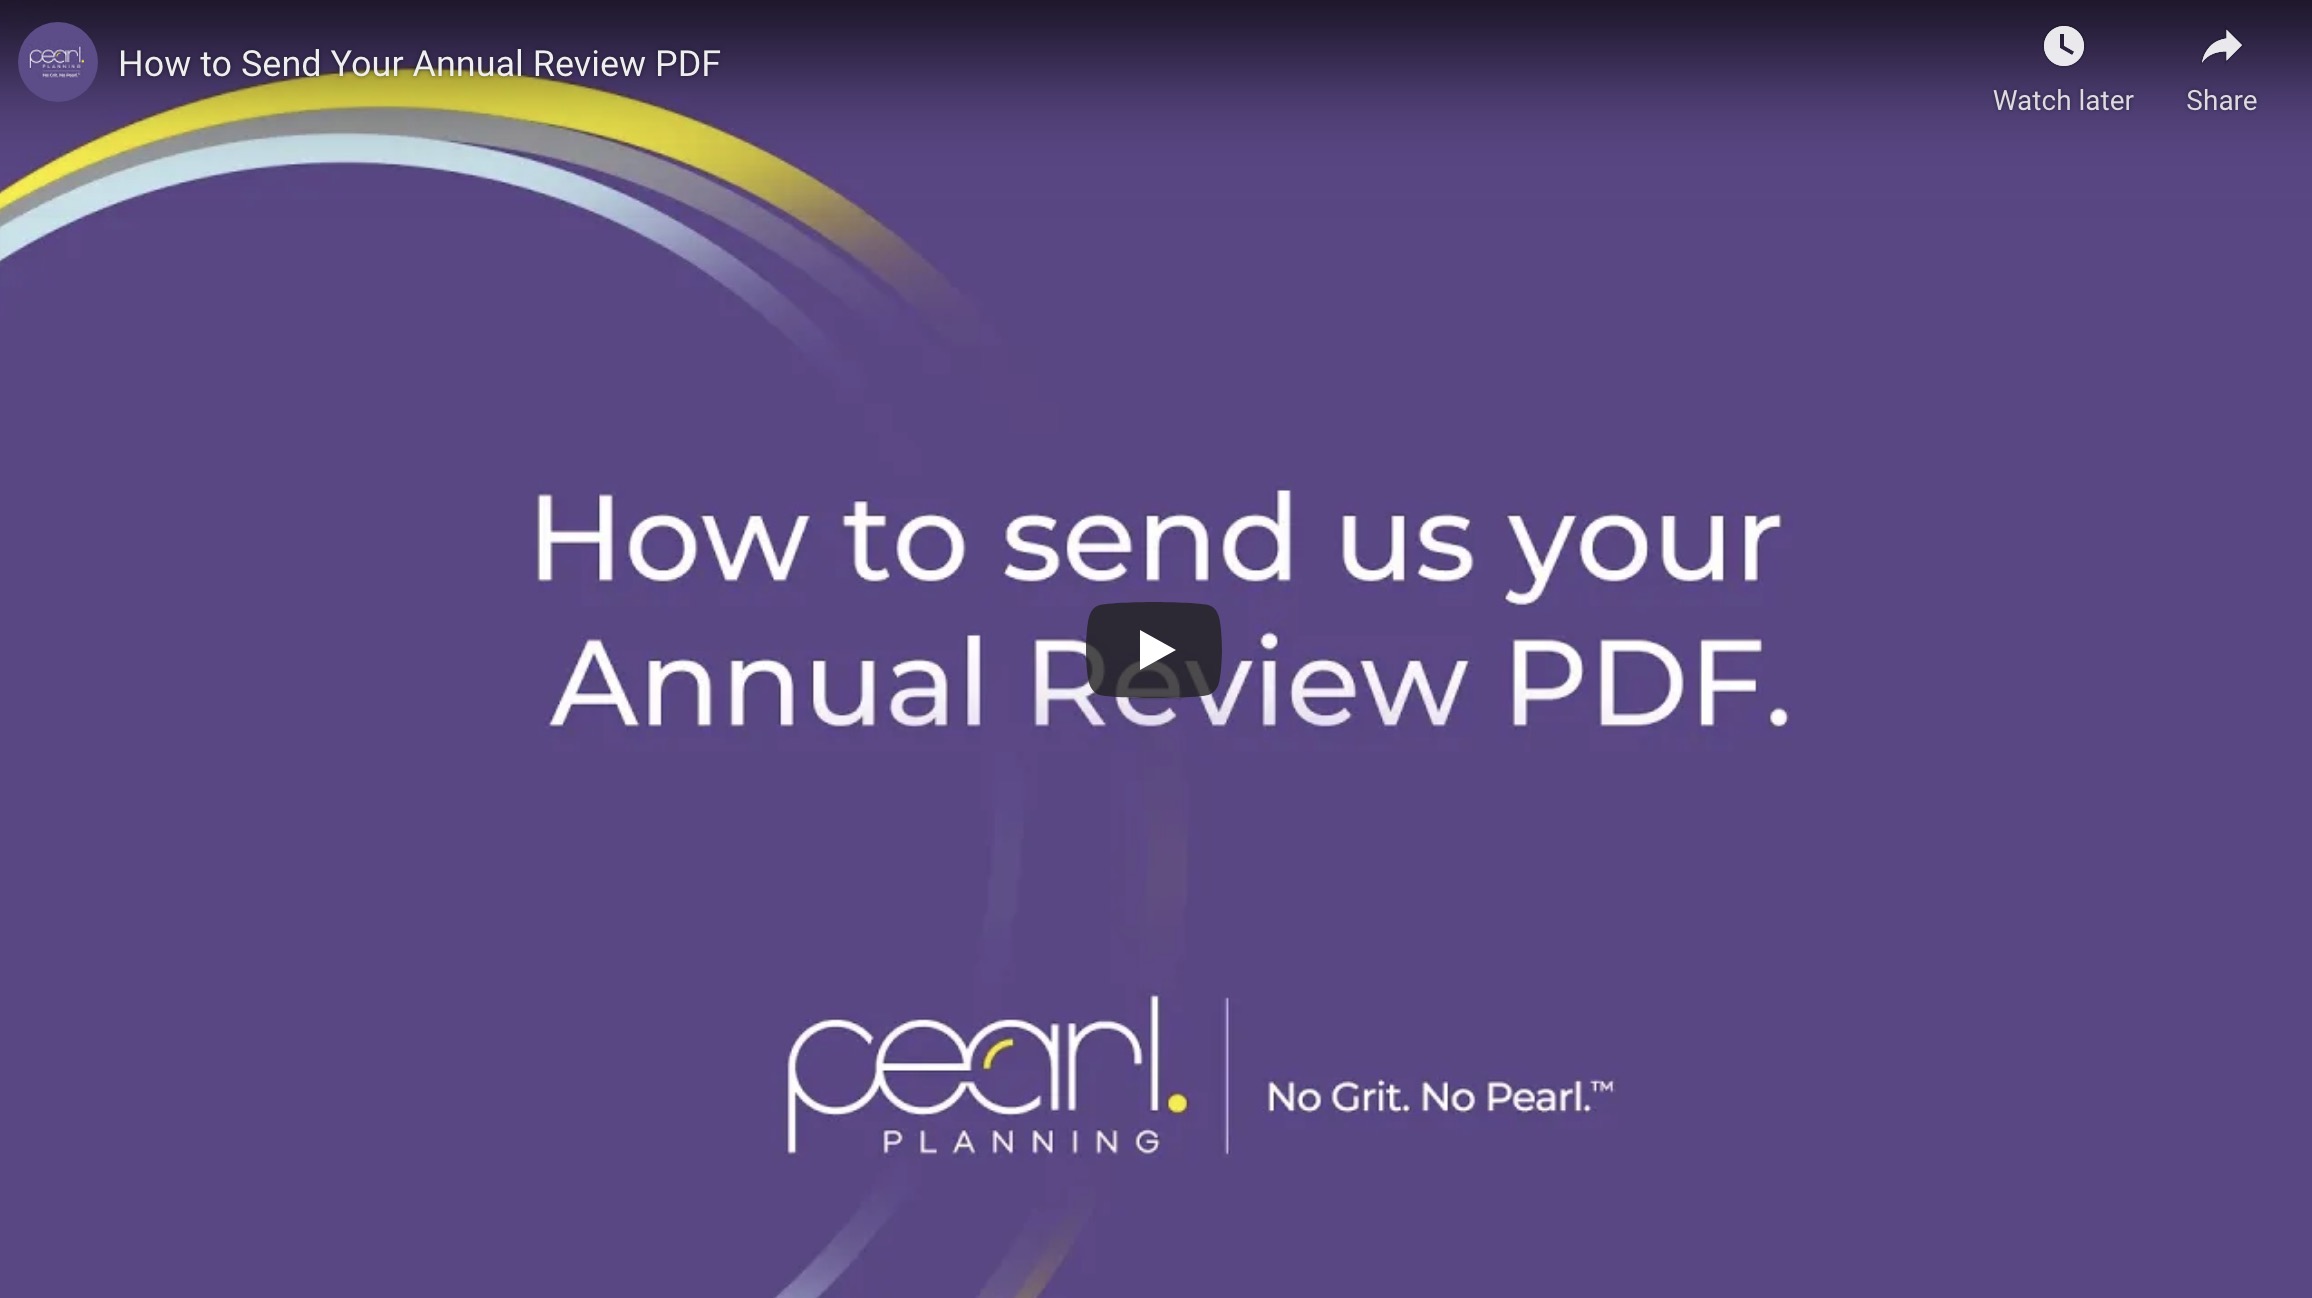 Video still for how to send us your annual review PDF